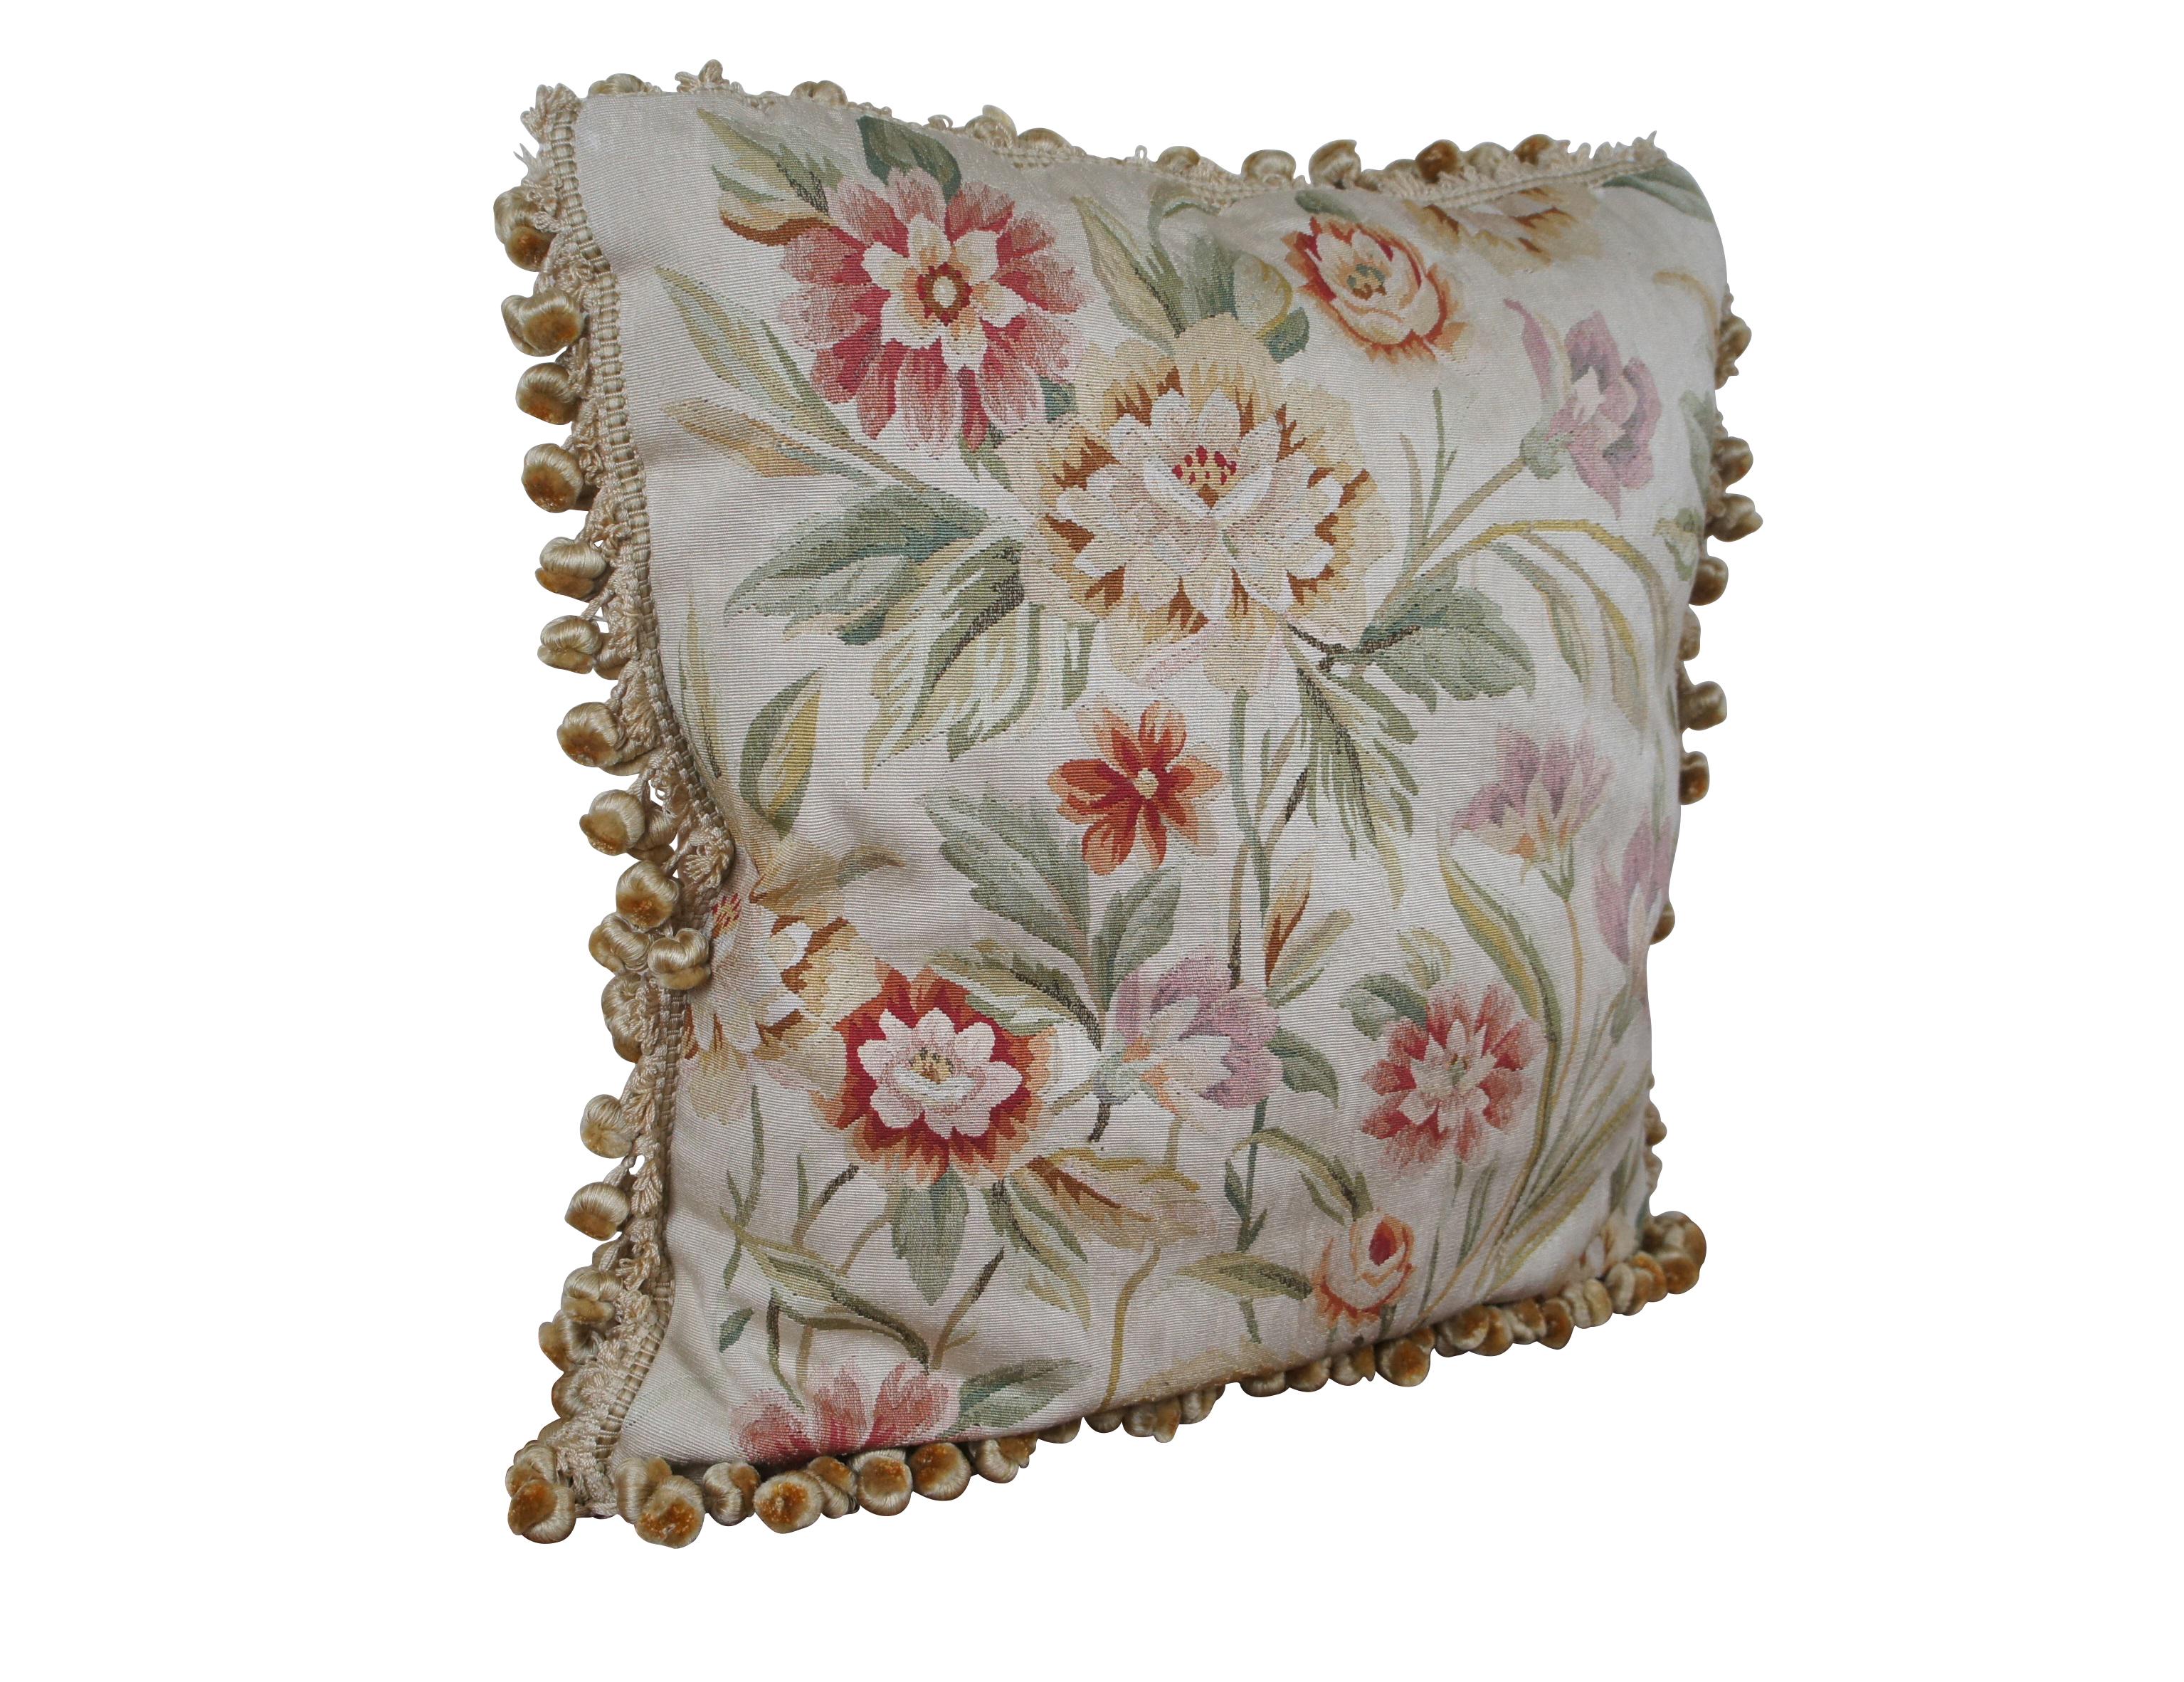 20th century French Aubusson style square throw pillow, embroidered in silk with and array of rust, cream, pink and purple flowers on leafy stems. Light beige ball tassel trim. Light brown velour back with zipper closure. Fiber